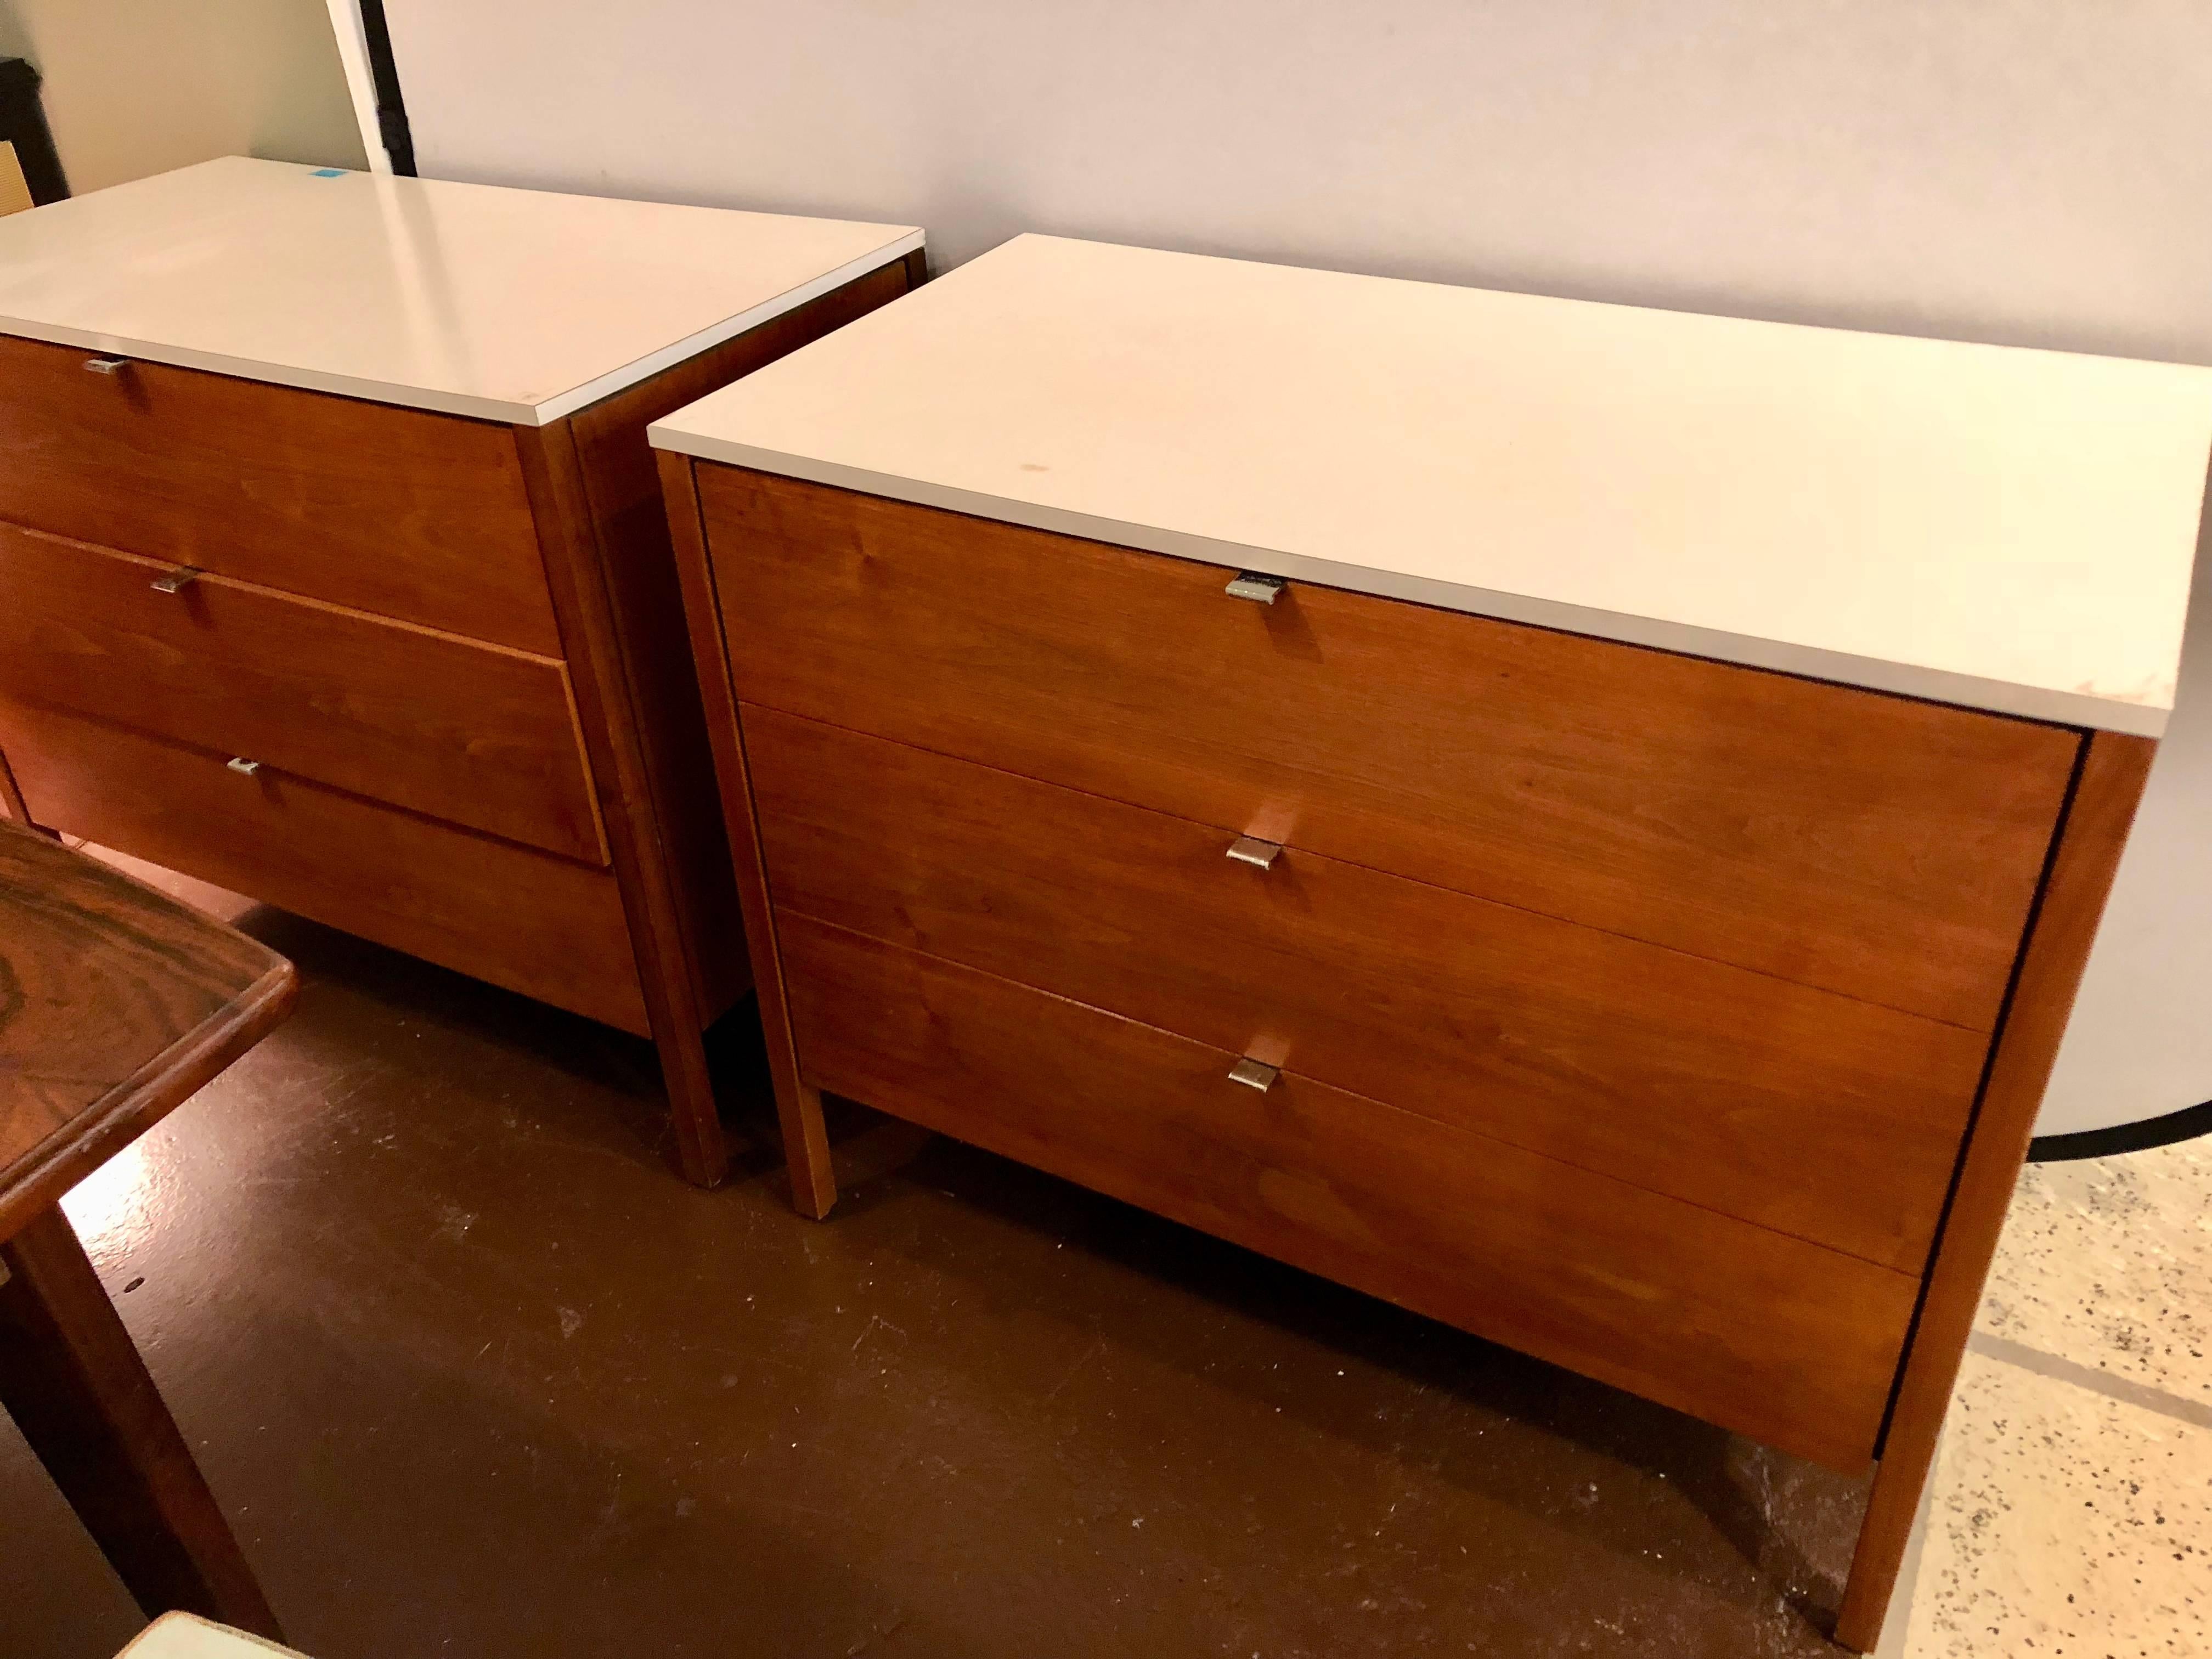 A pair of signed custom Florence Knoll and Associates Mid-Century Modern chests, commodes or nightstands. Laminate and chrome design with three graduating drawers all having chrome pulls supporting a white laminate top. The back fully finish in a